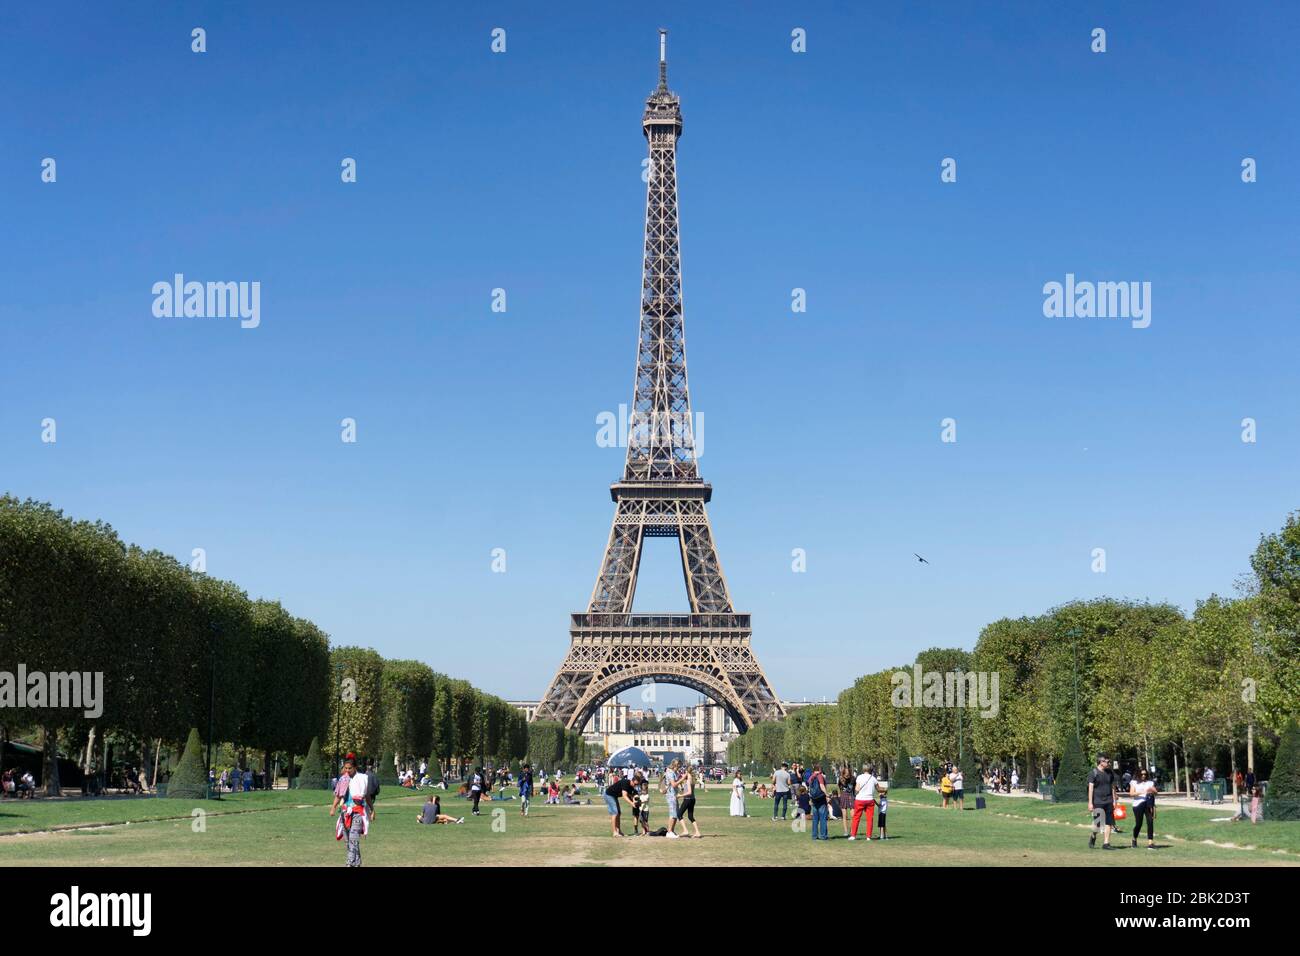 PARIS, FRANCE - SEPTEMBER 15, 2019: View at the Eiffel Tower from the Champ de Mars (Field of Mars). Stock Photo